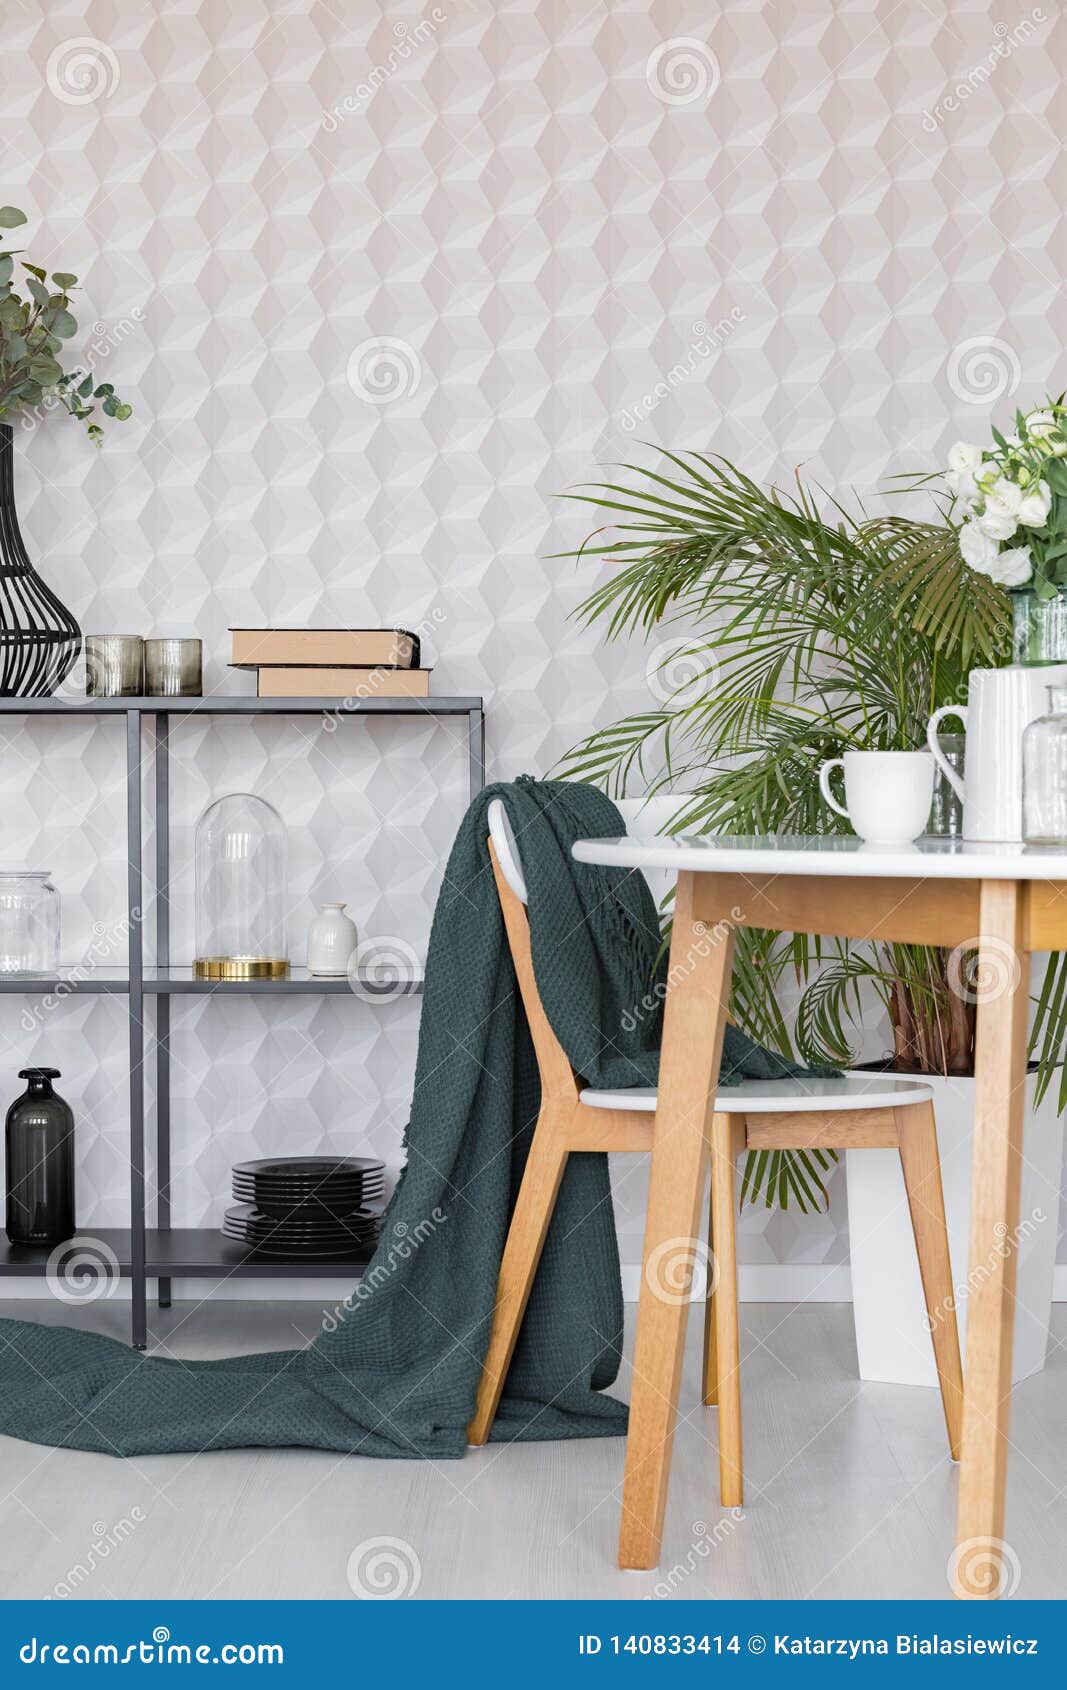 876 Dining Room Wallpaper Photos Free Royalty Free Stock Photos From Dreamstime